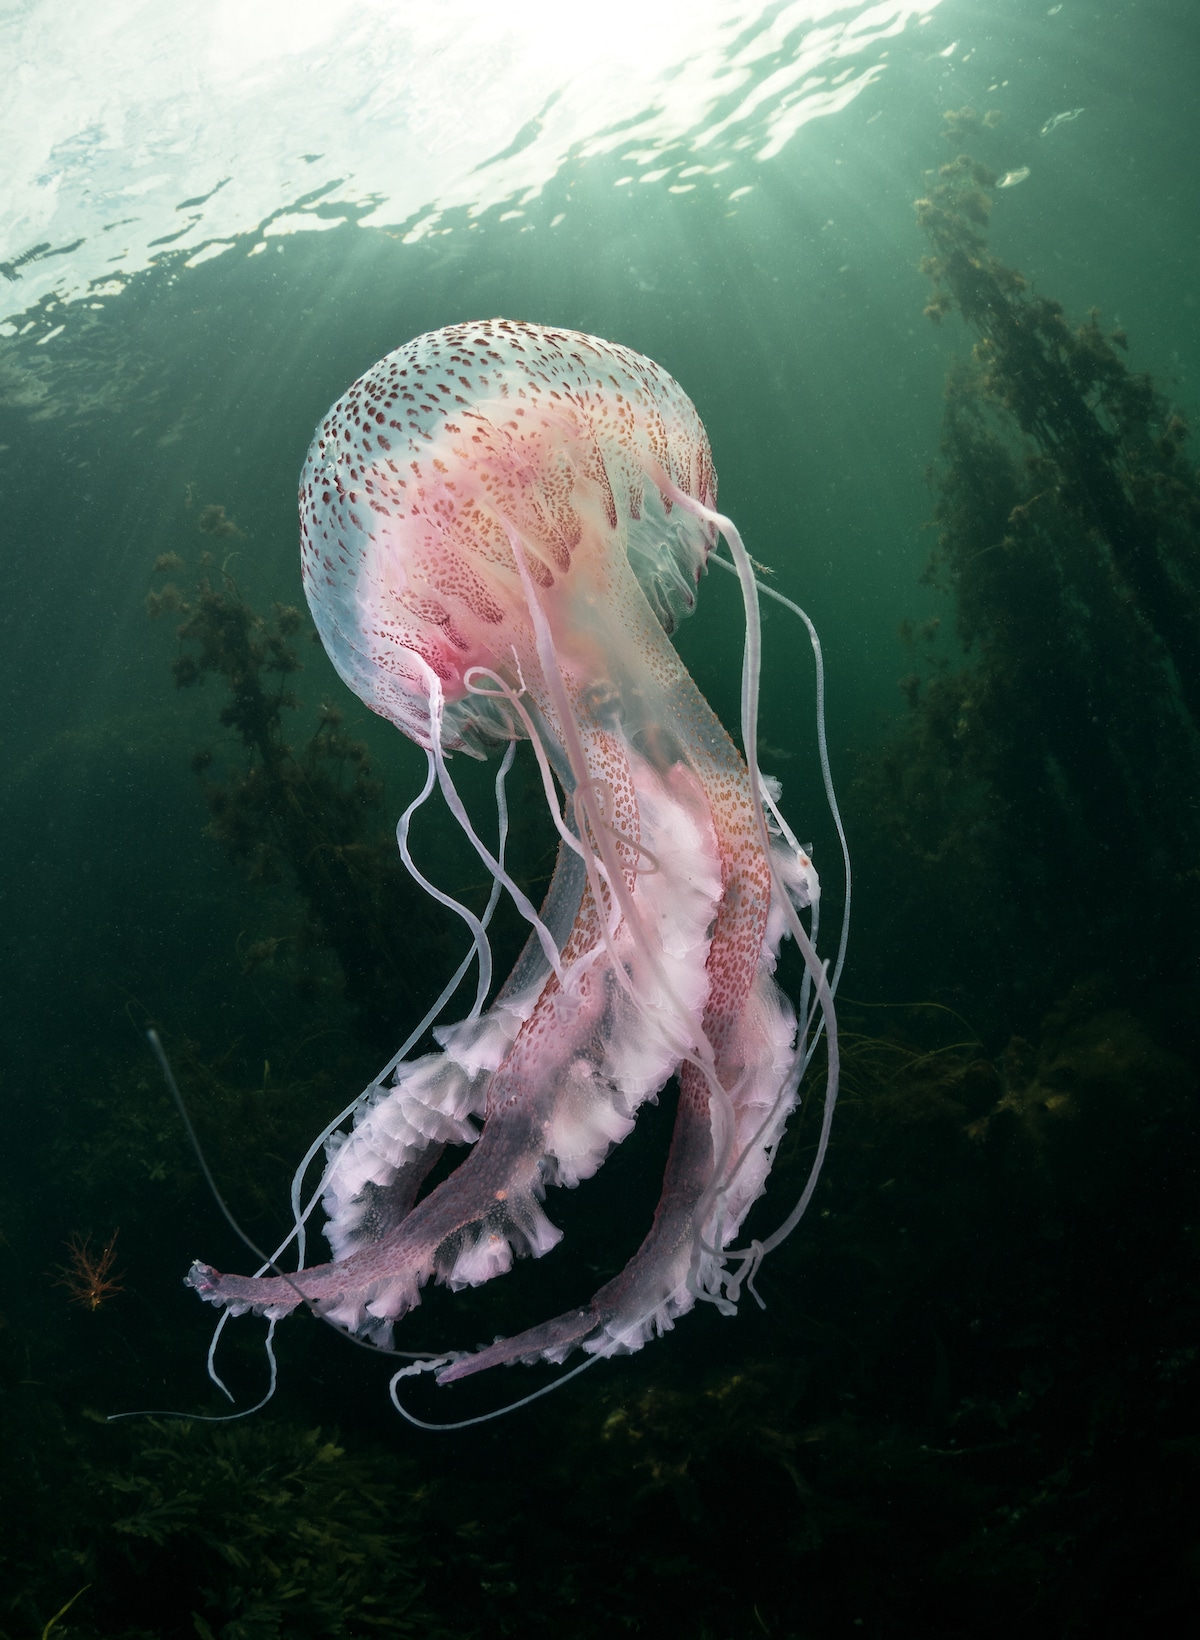 Jellyfish Photograph from Trevor Rees